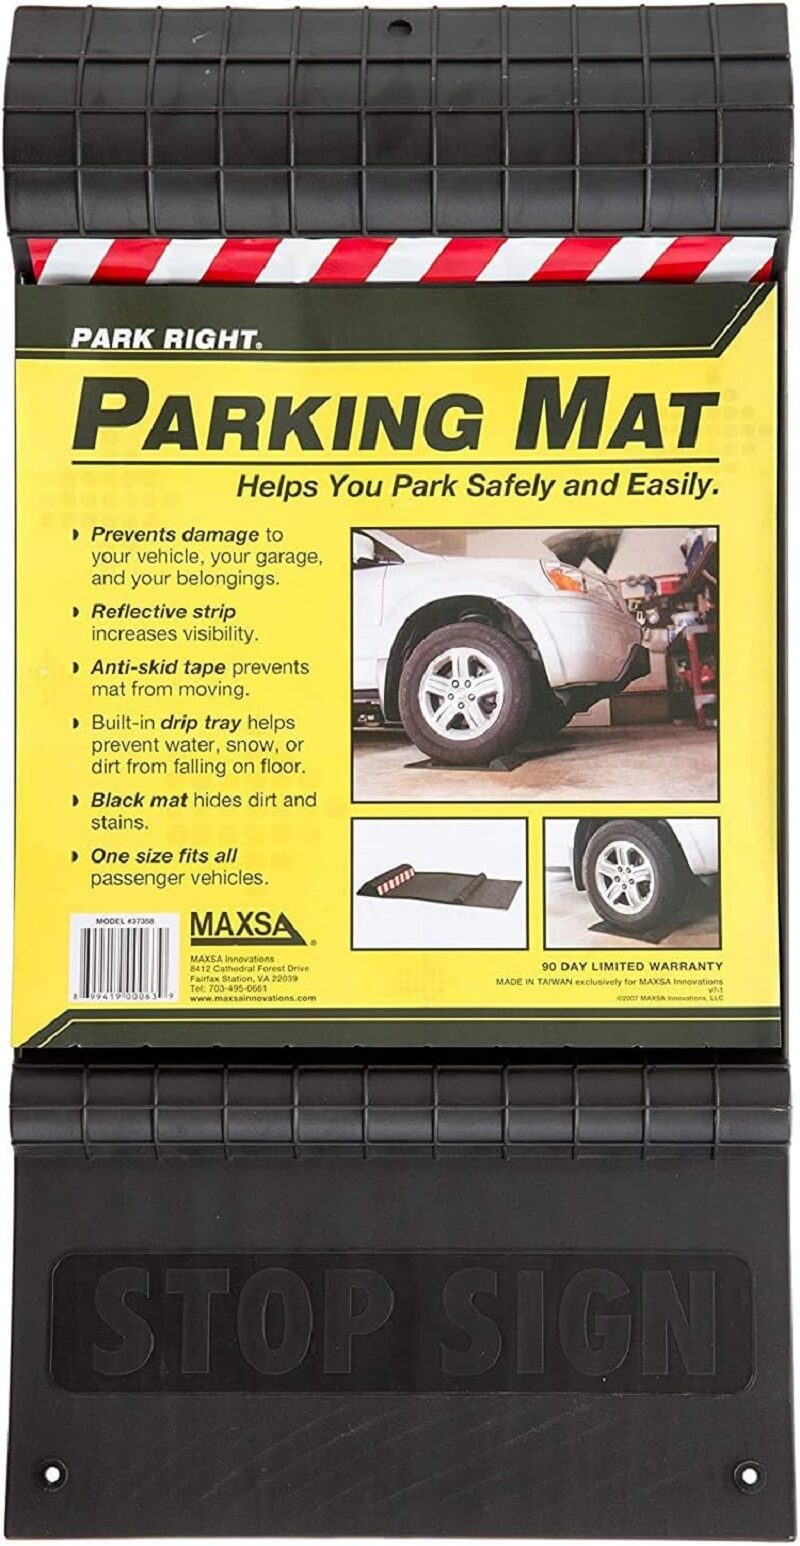 Maxsa Parking Mat Helps You Park Safely Every Time